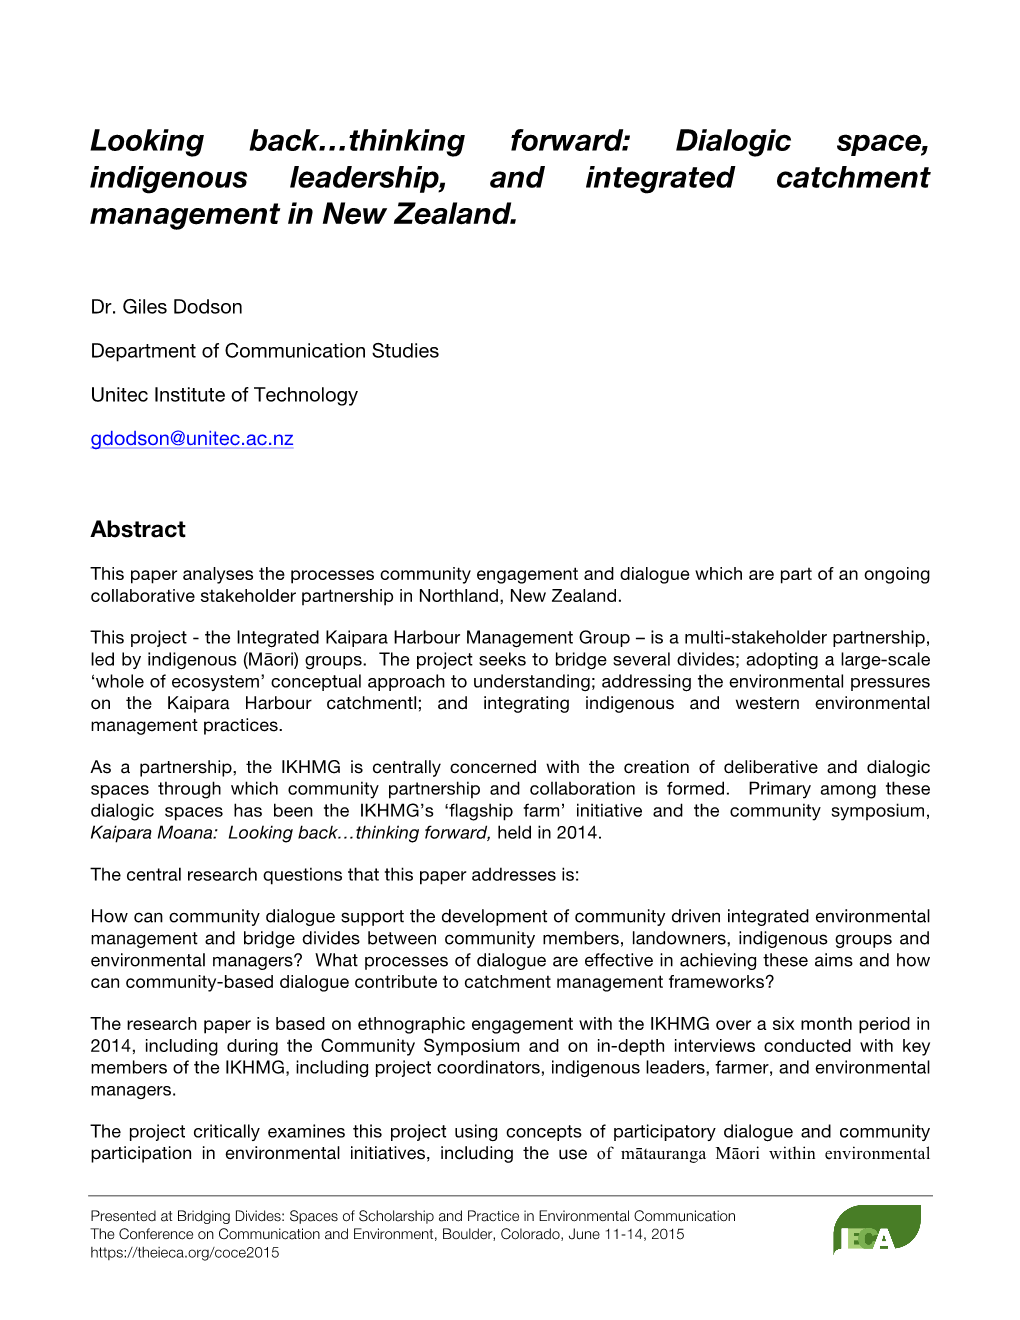 Looking Back…Thinking Forward: Dialogic Space, Indigenous Leadership, and Integrated Catchment Management in New Zealand